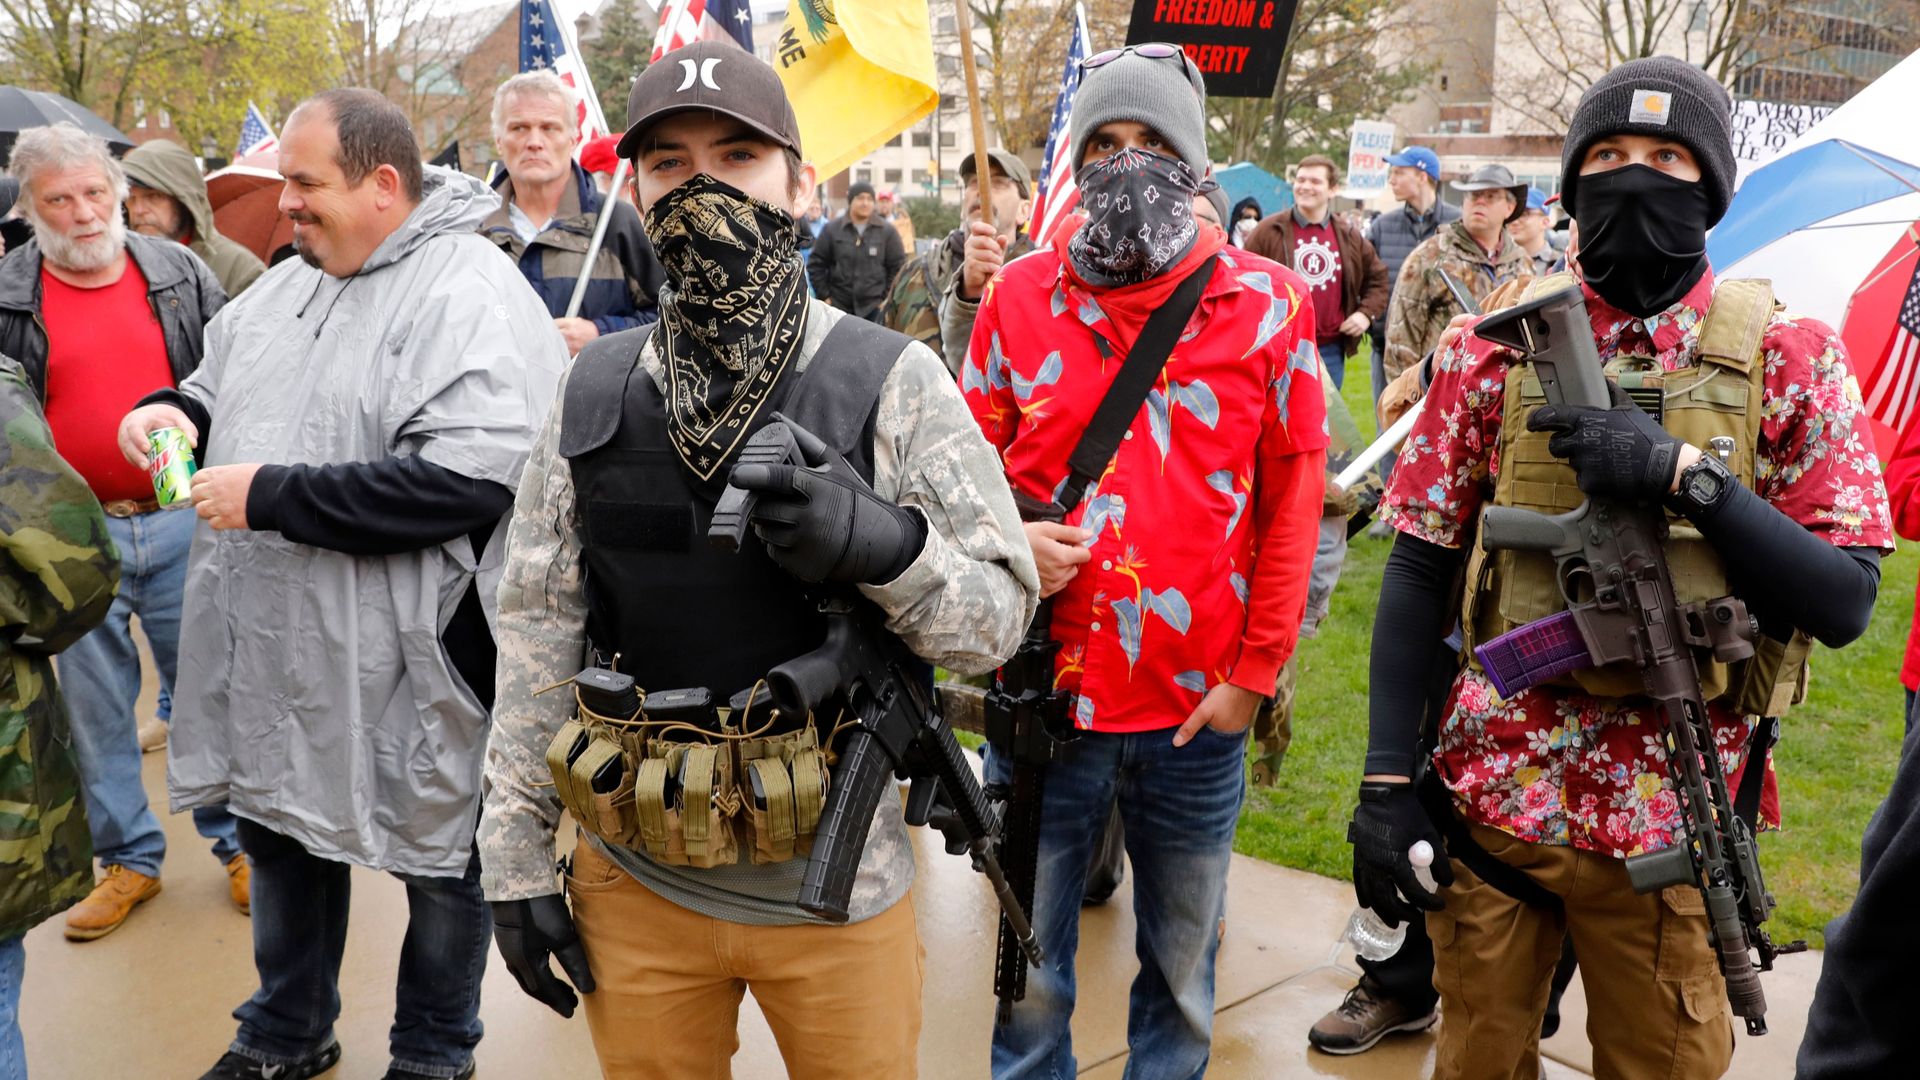 Armed protesters provide security as demonstrators take part in an "American Patriot Rally,"